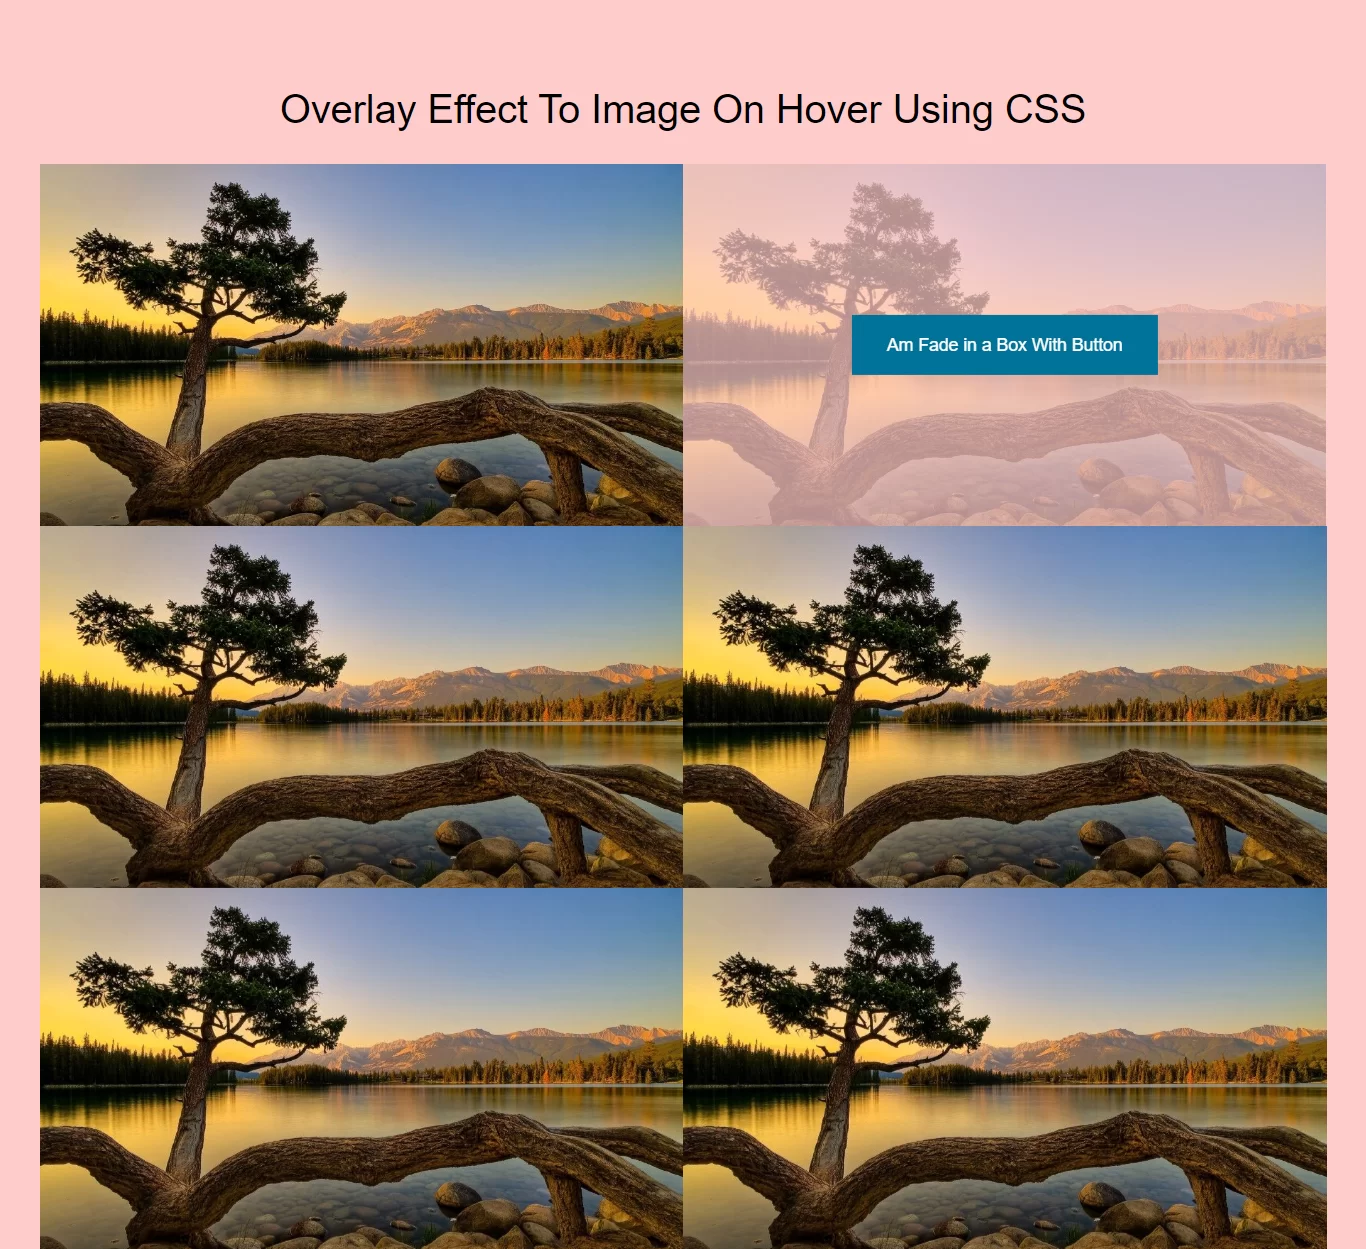 How To Apply Overlay Effect To Image On Hover Using CSS